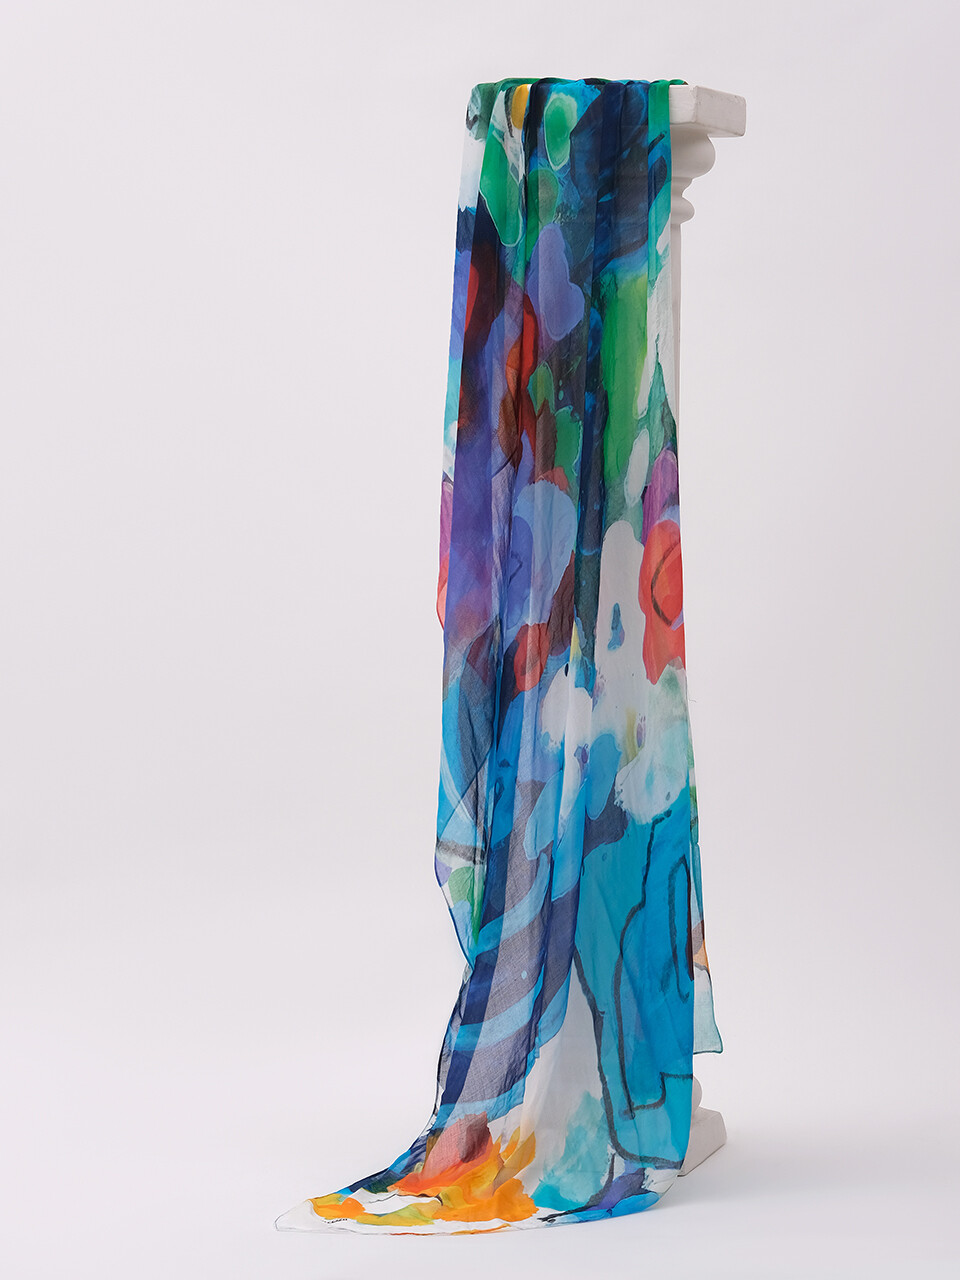 Simply Art Dolcezza: Wild Virginia Abstract Art Scarf SOLD OUT